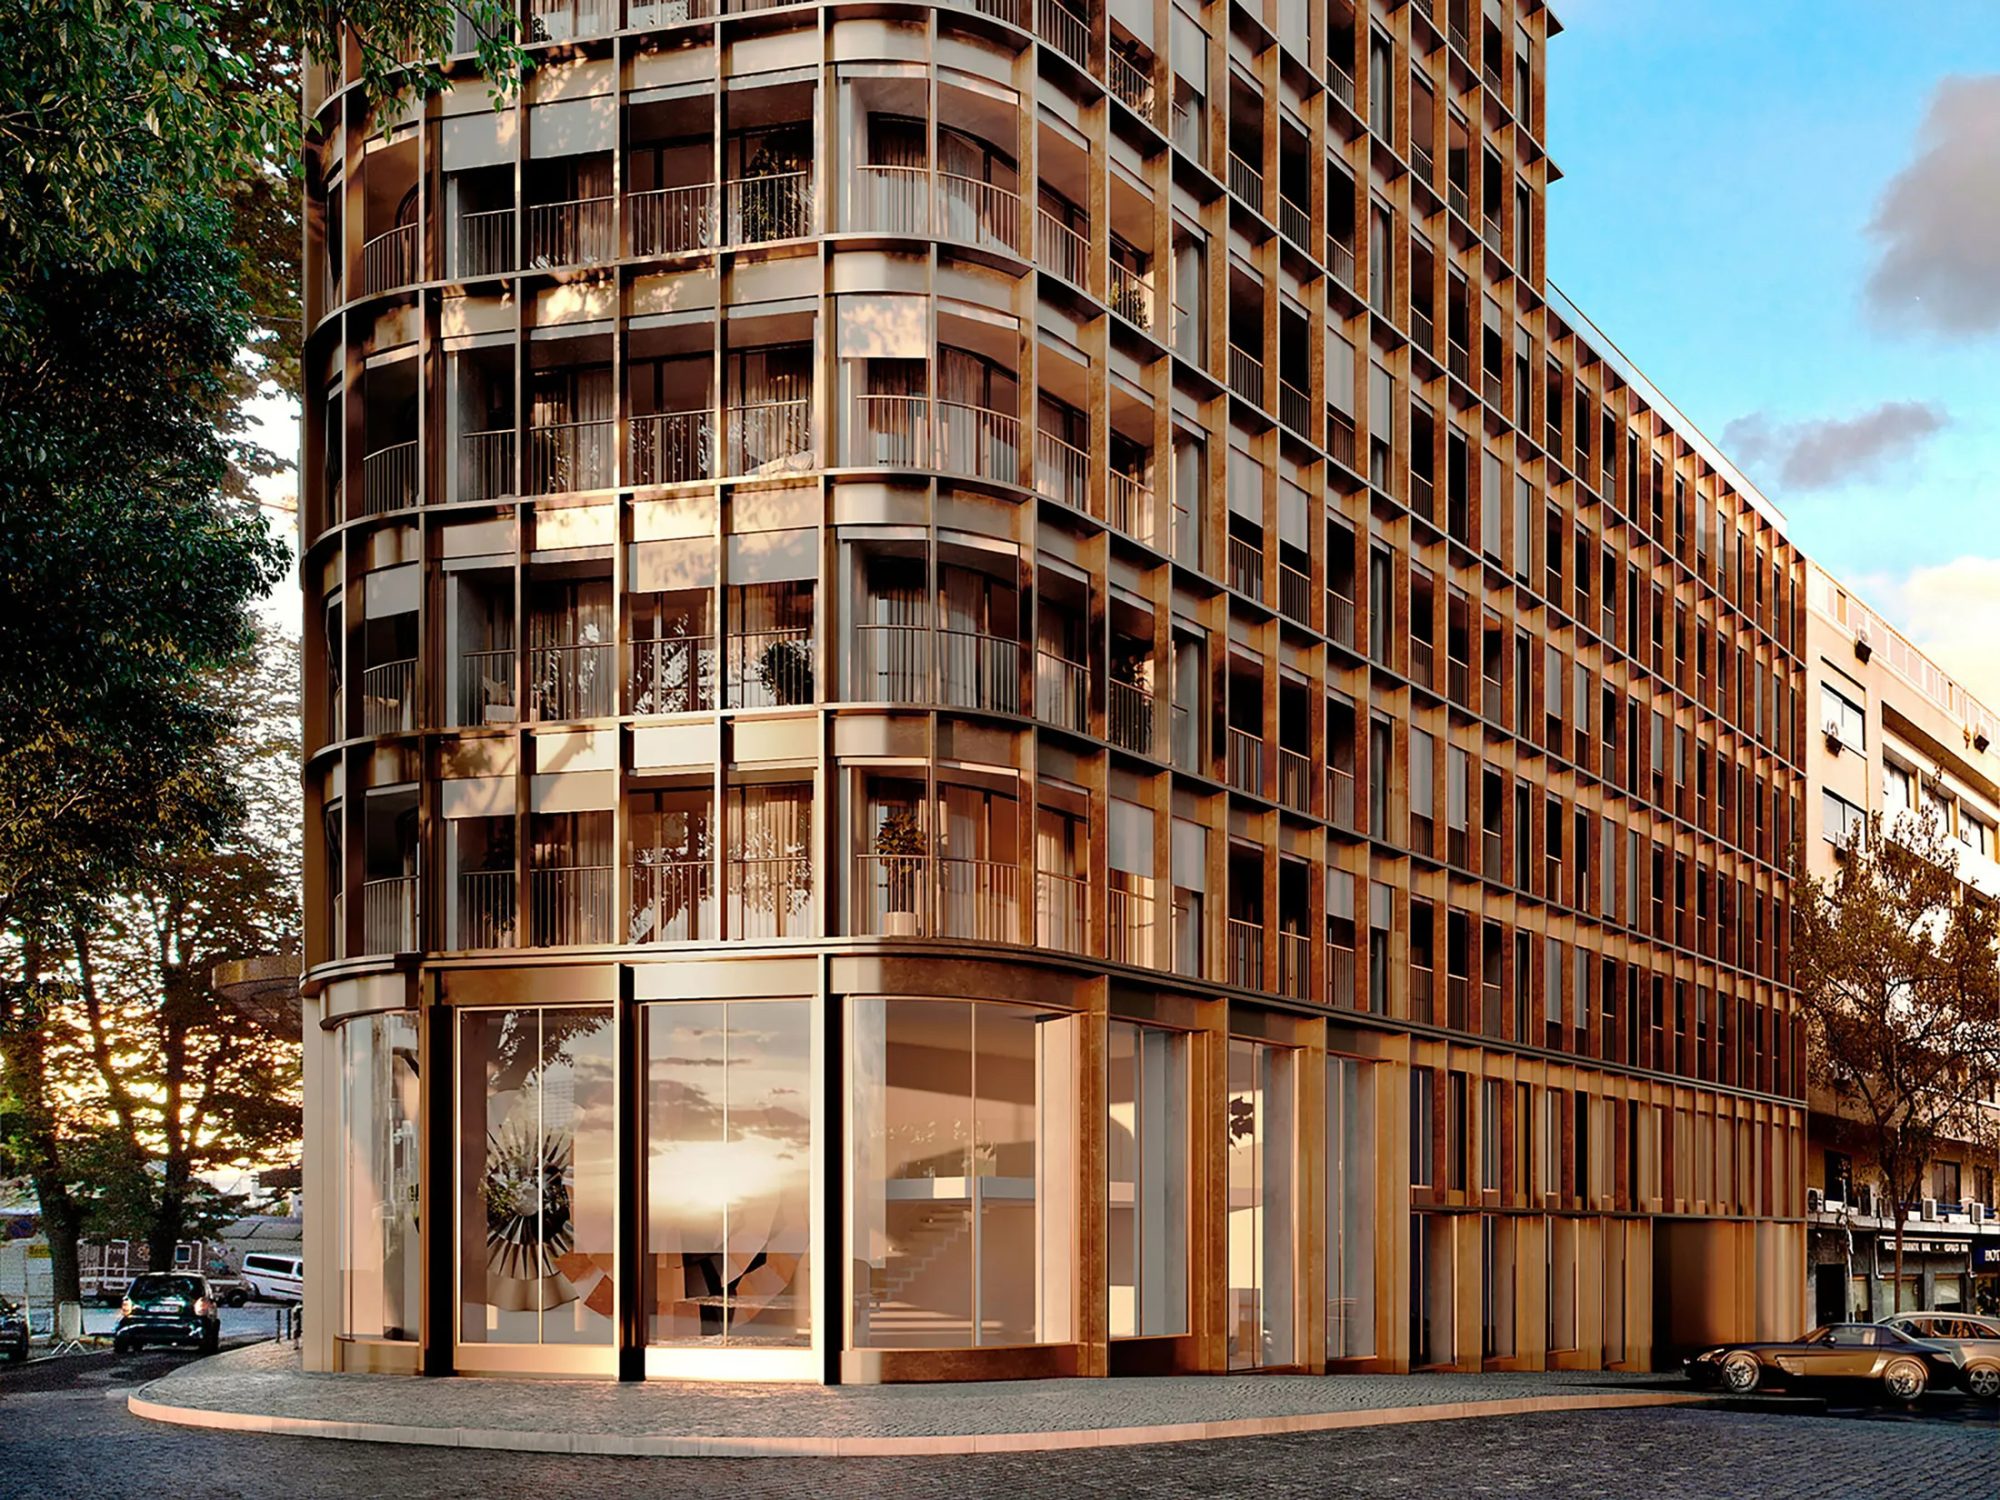 Discover unparalleled luxury and style at BOW in Lisbon’s Marquês de Pombal